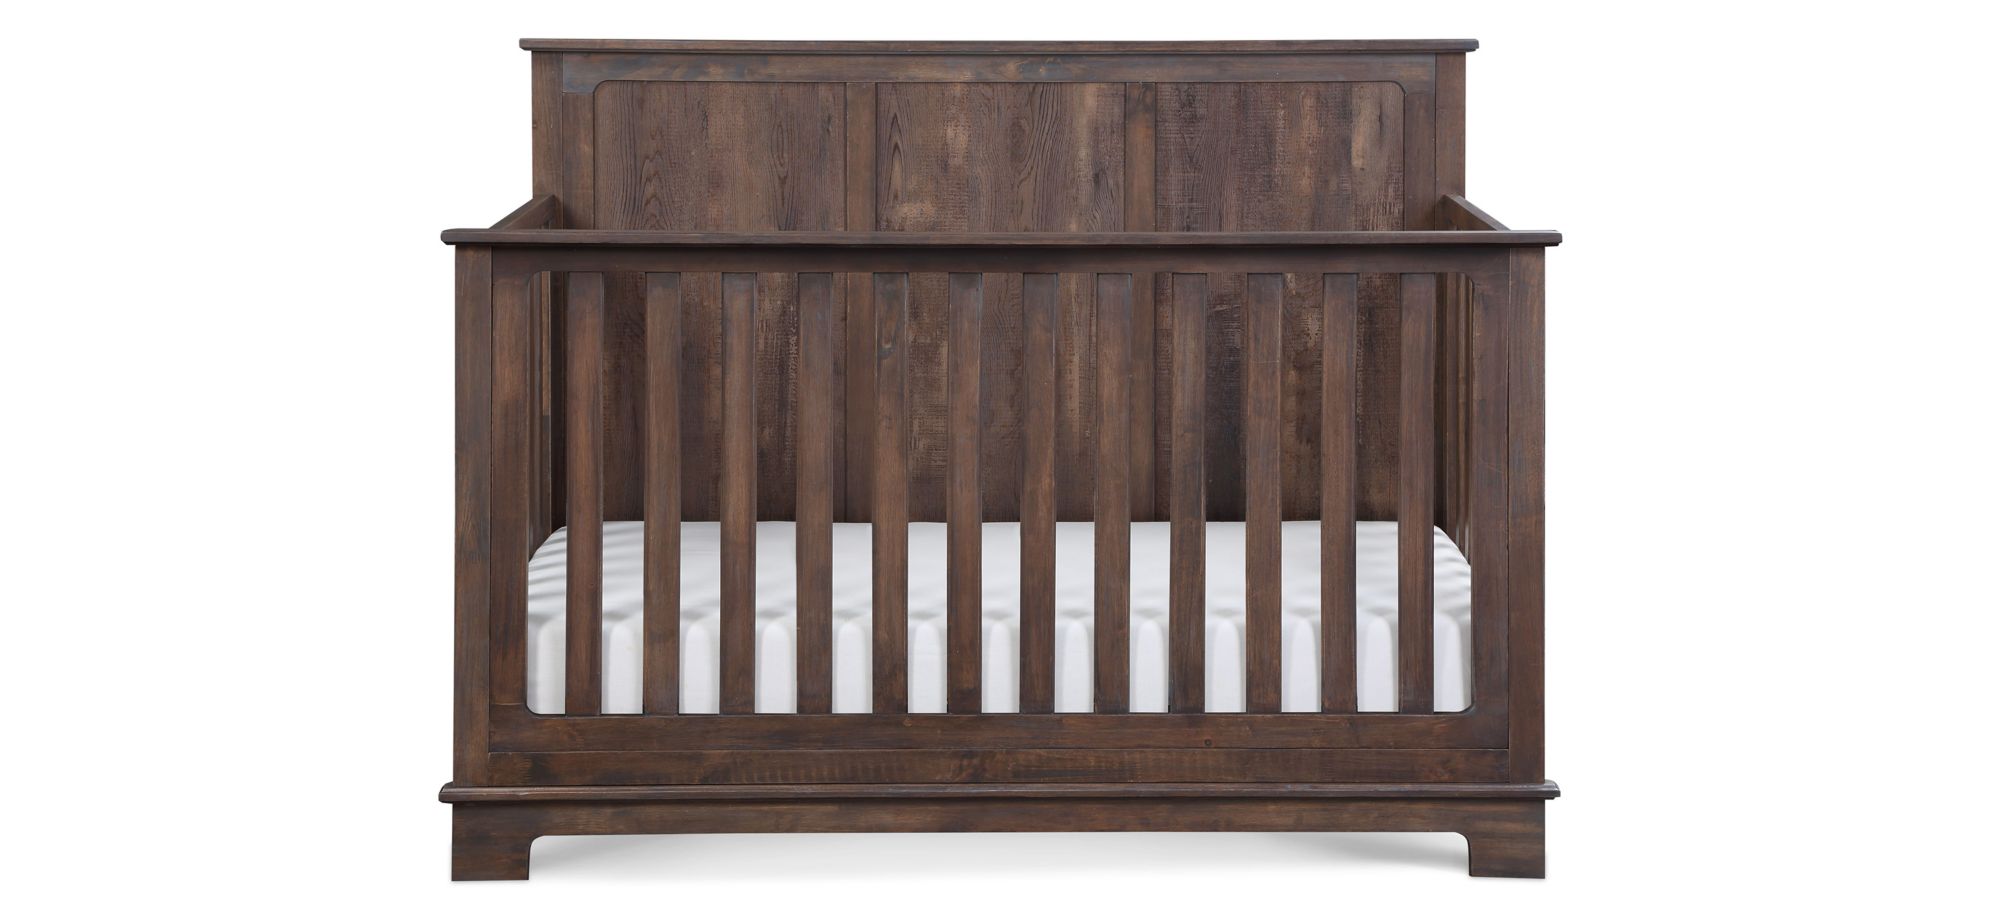 Grayson Full Bed Conversion Kit in Rustic Barnwood by Heritage Baby